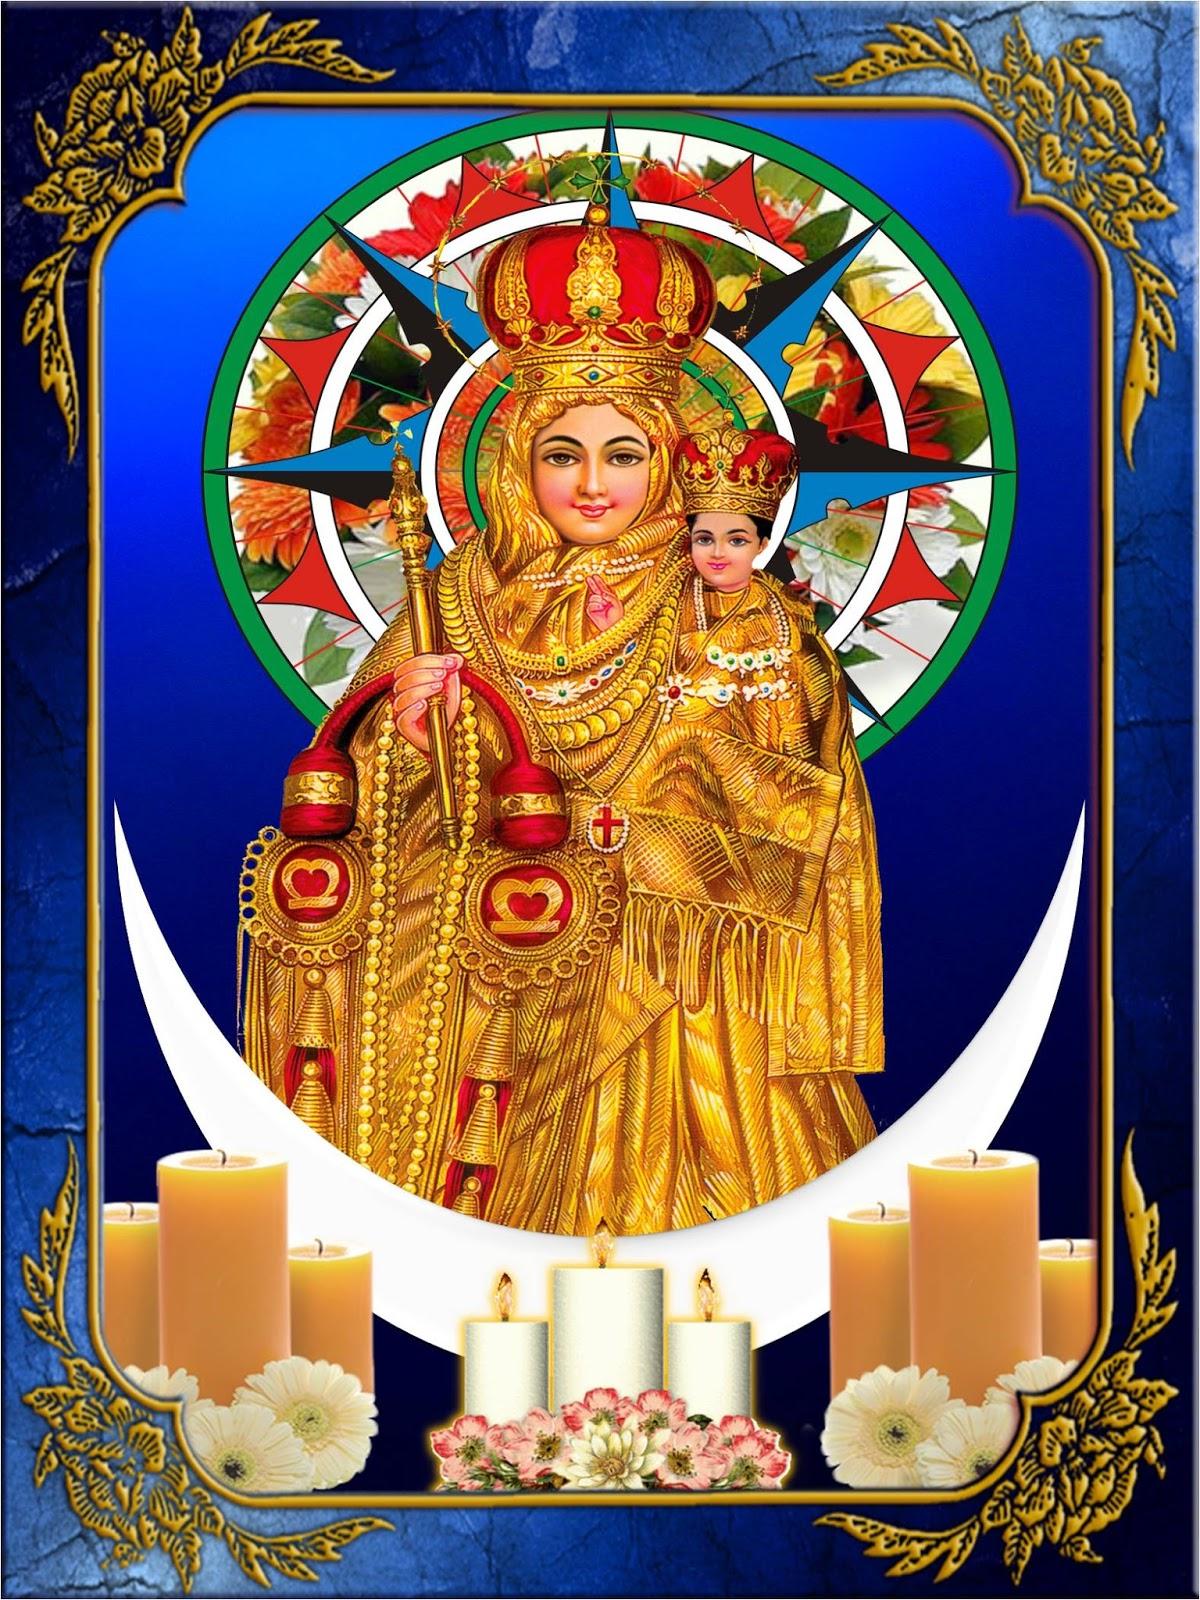 Our Lady of Good Health Vailankanni